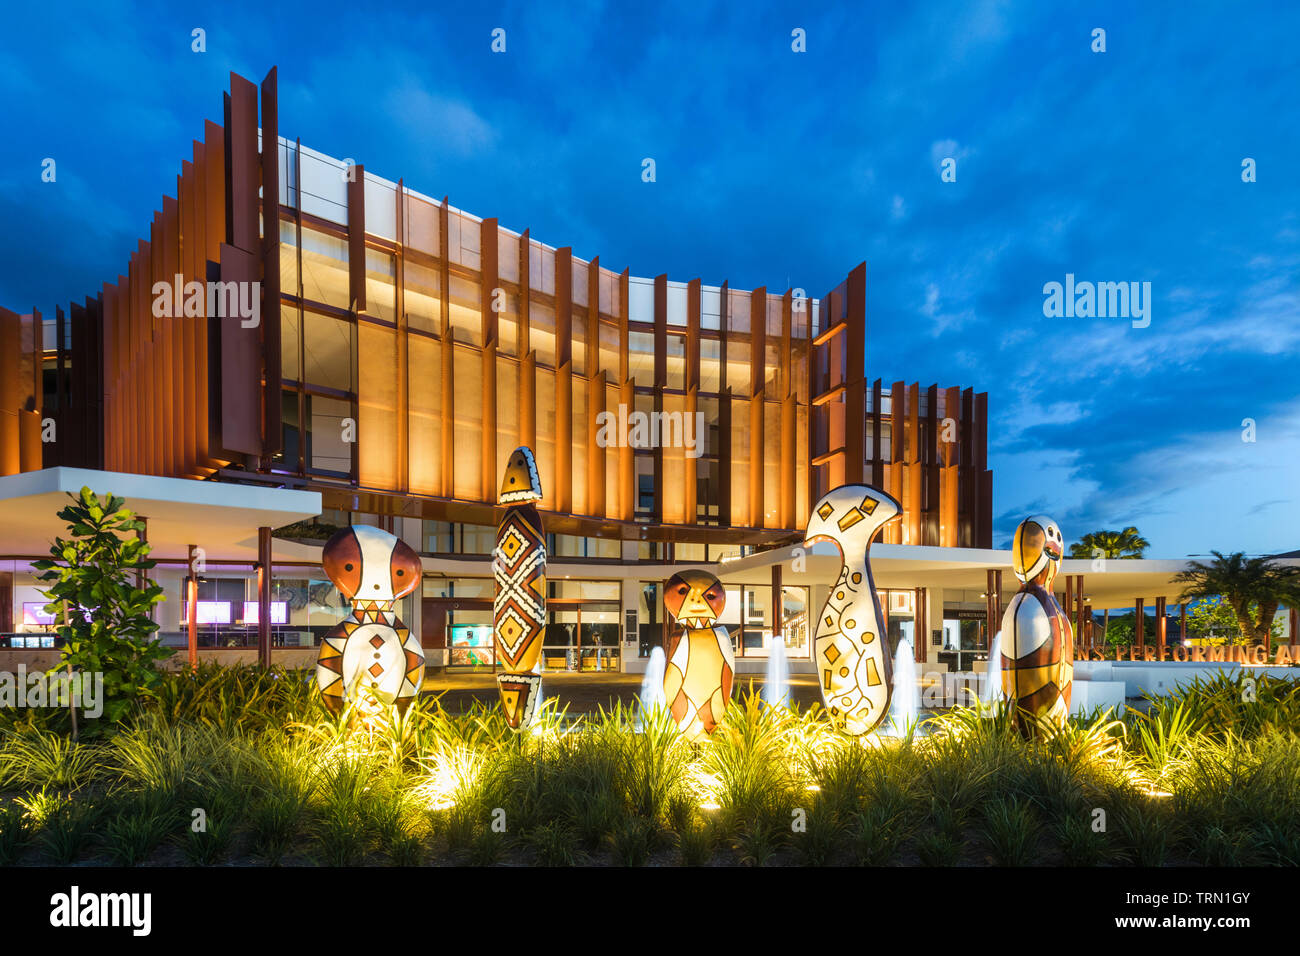 'Bagu' indigenous sculptures in front of the Cairns Performing Arts Centre at twilight, Cairns, Queensland, Australia Stock Photo